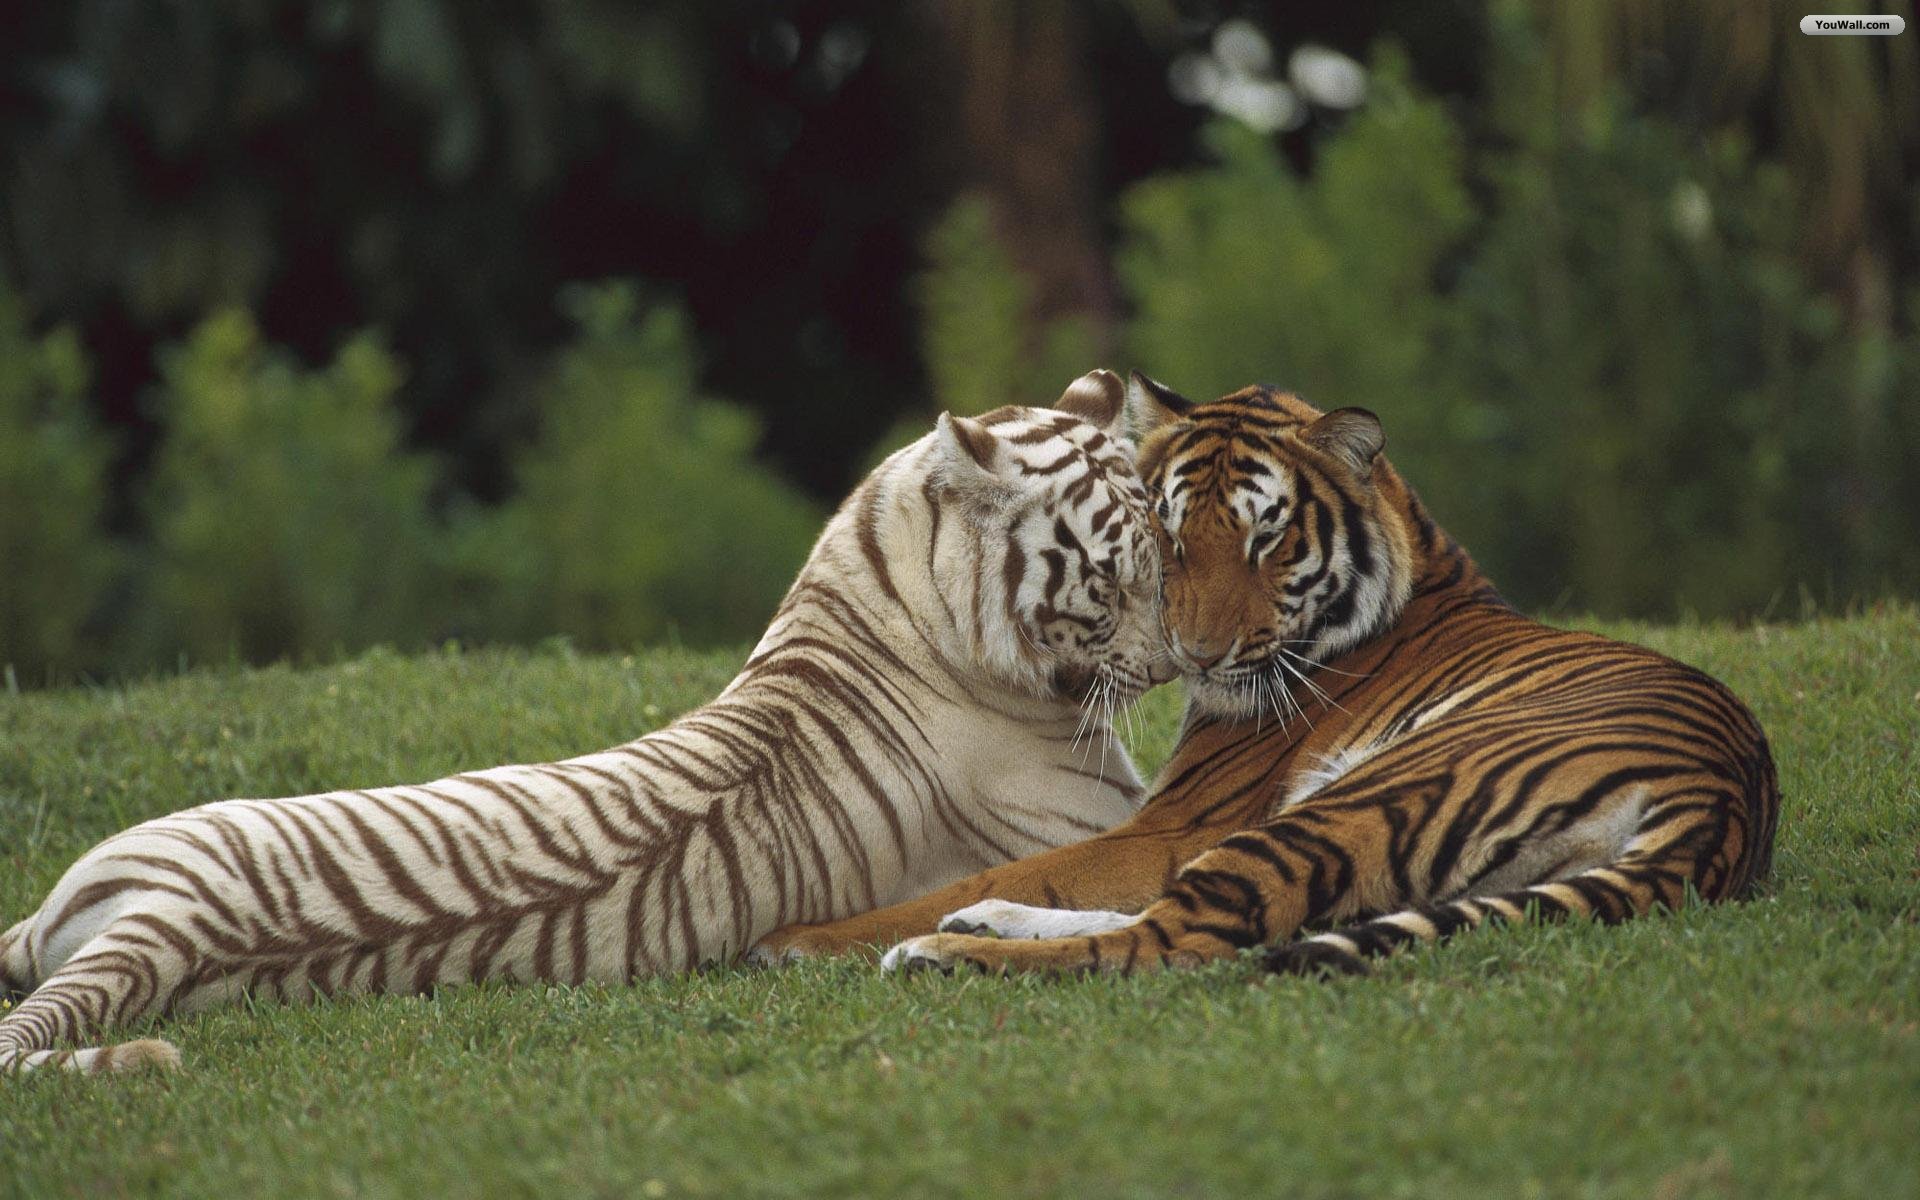 Tiger Hd Wallpapers Tiger Pictures Free Download P - Two Tigers In Love - HD Wallpaper 